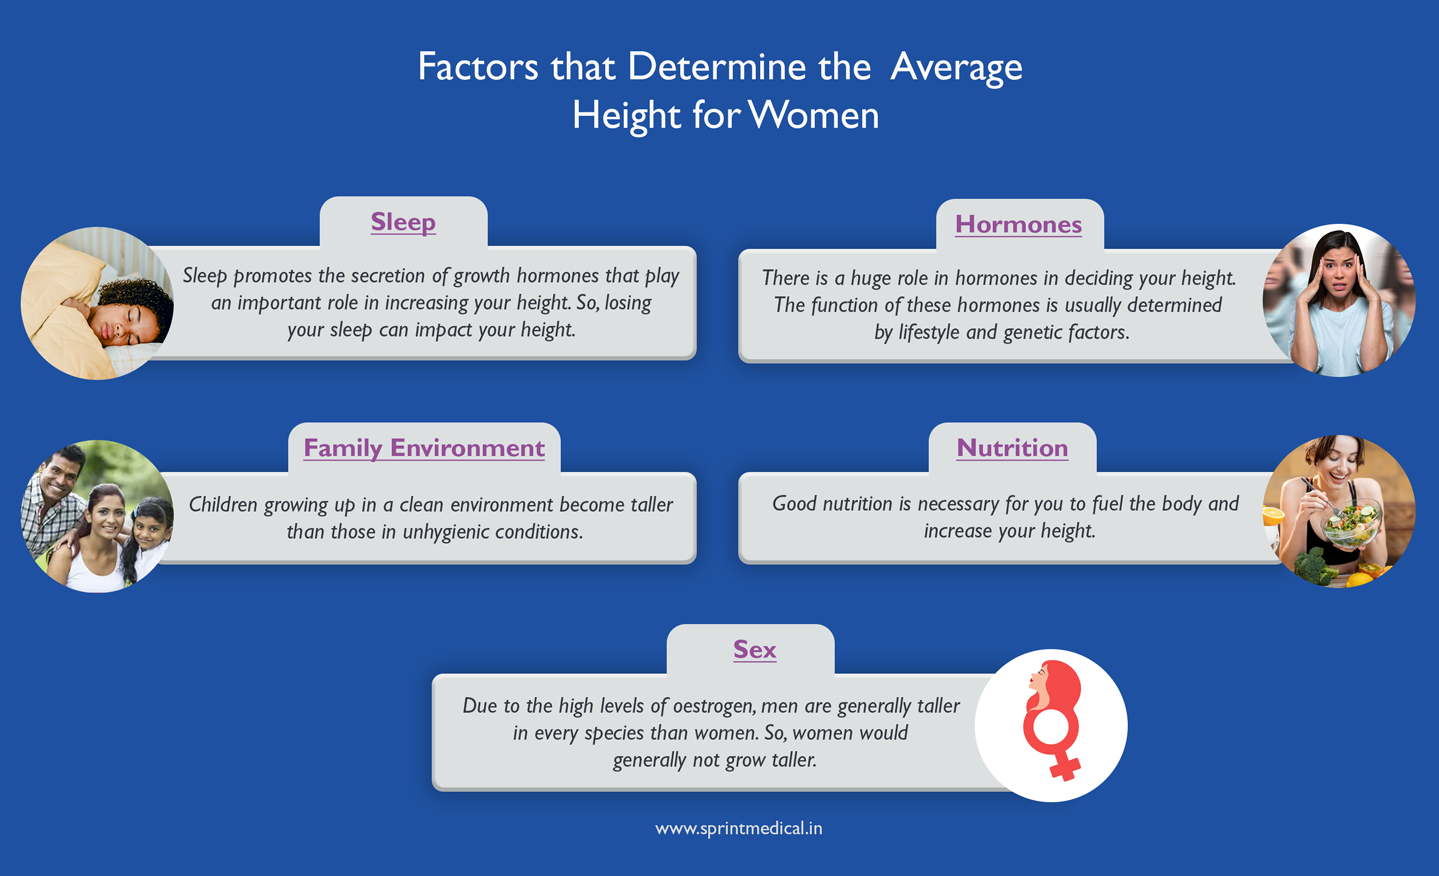 https://images.ctfassets.net/eexbcii1ci83/3N4YucPzMLqNIMM4fHNBcd/52034dd891cac975506e1f2e0fc532ed/Factors_that_Determine_the_Average_Height_for_Women.png